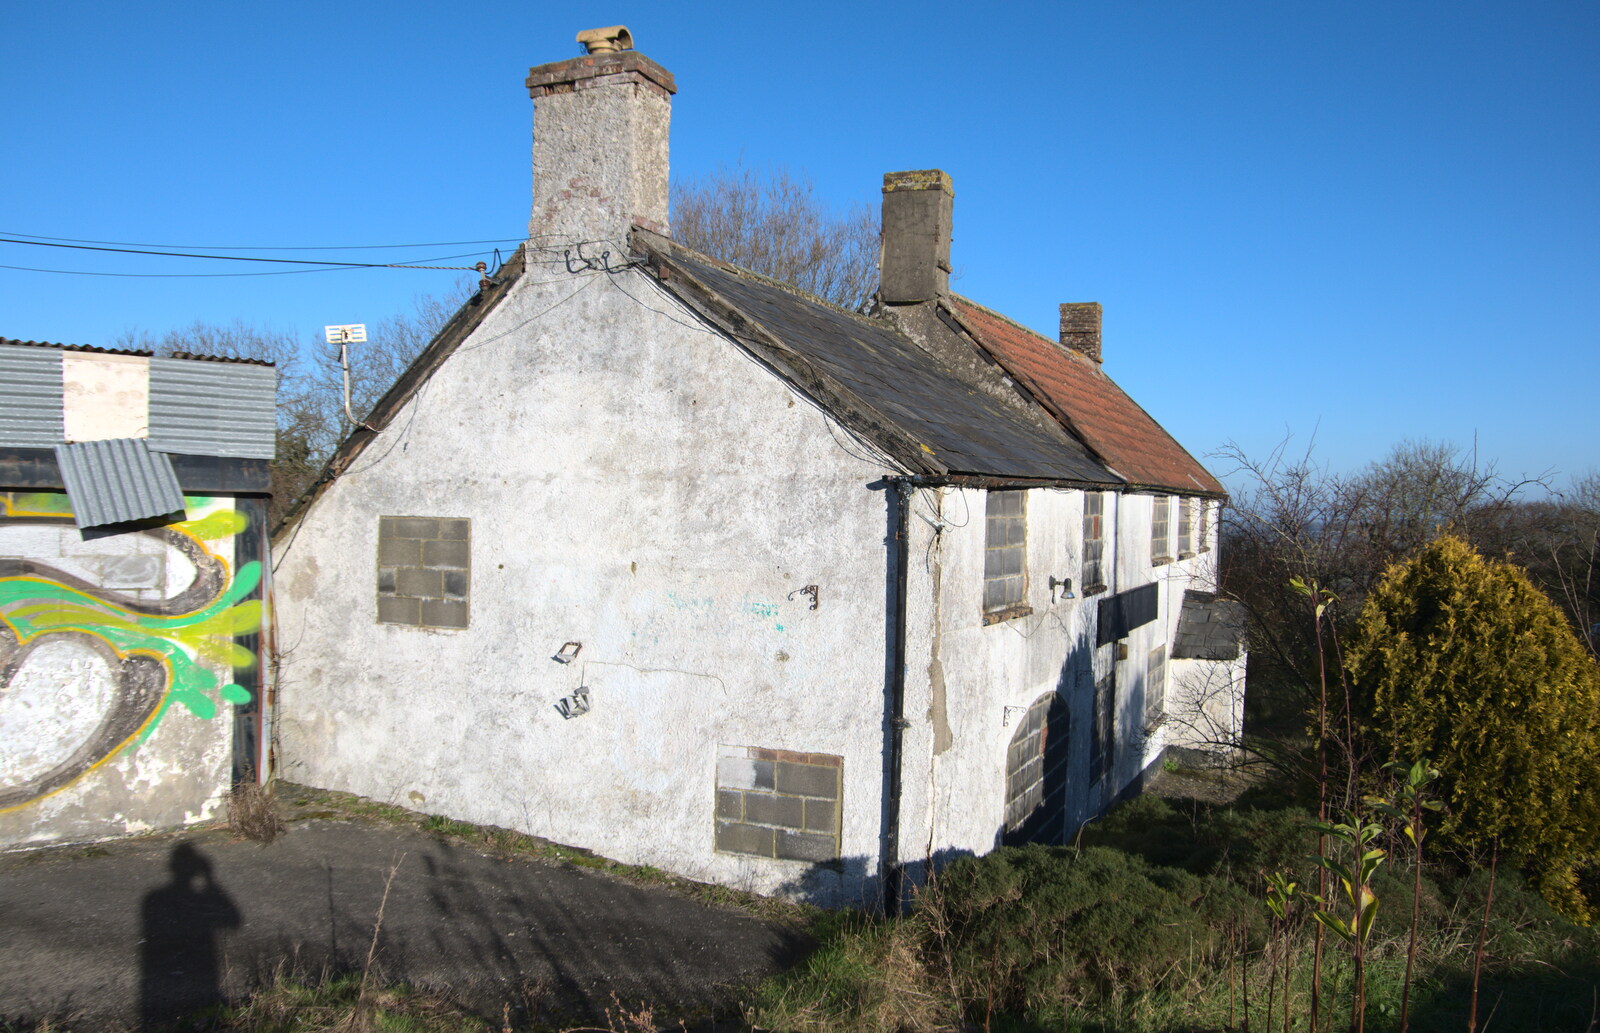 The derelict café and tea rooms on the A303 from A Short Trip to Spreyton, Devon - 18th January 2020